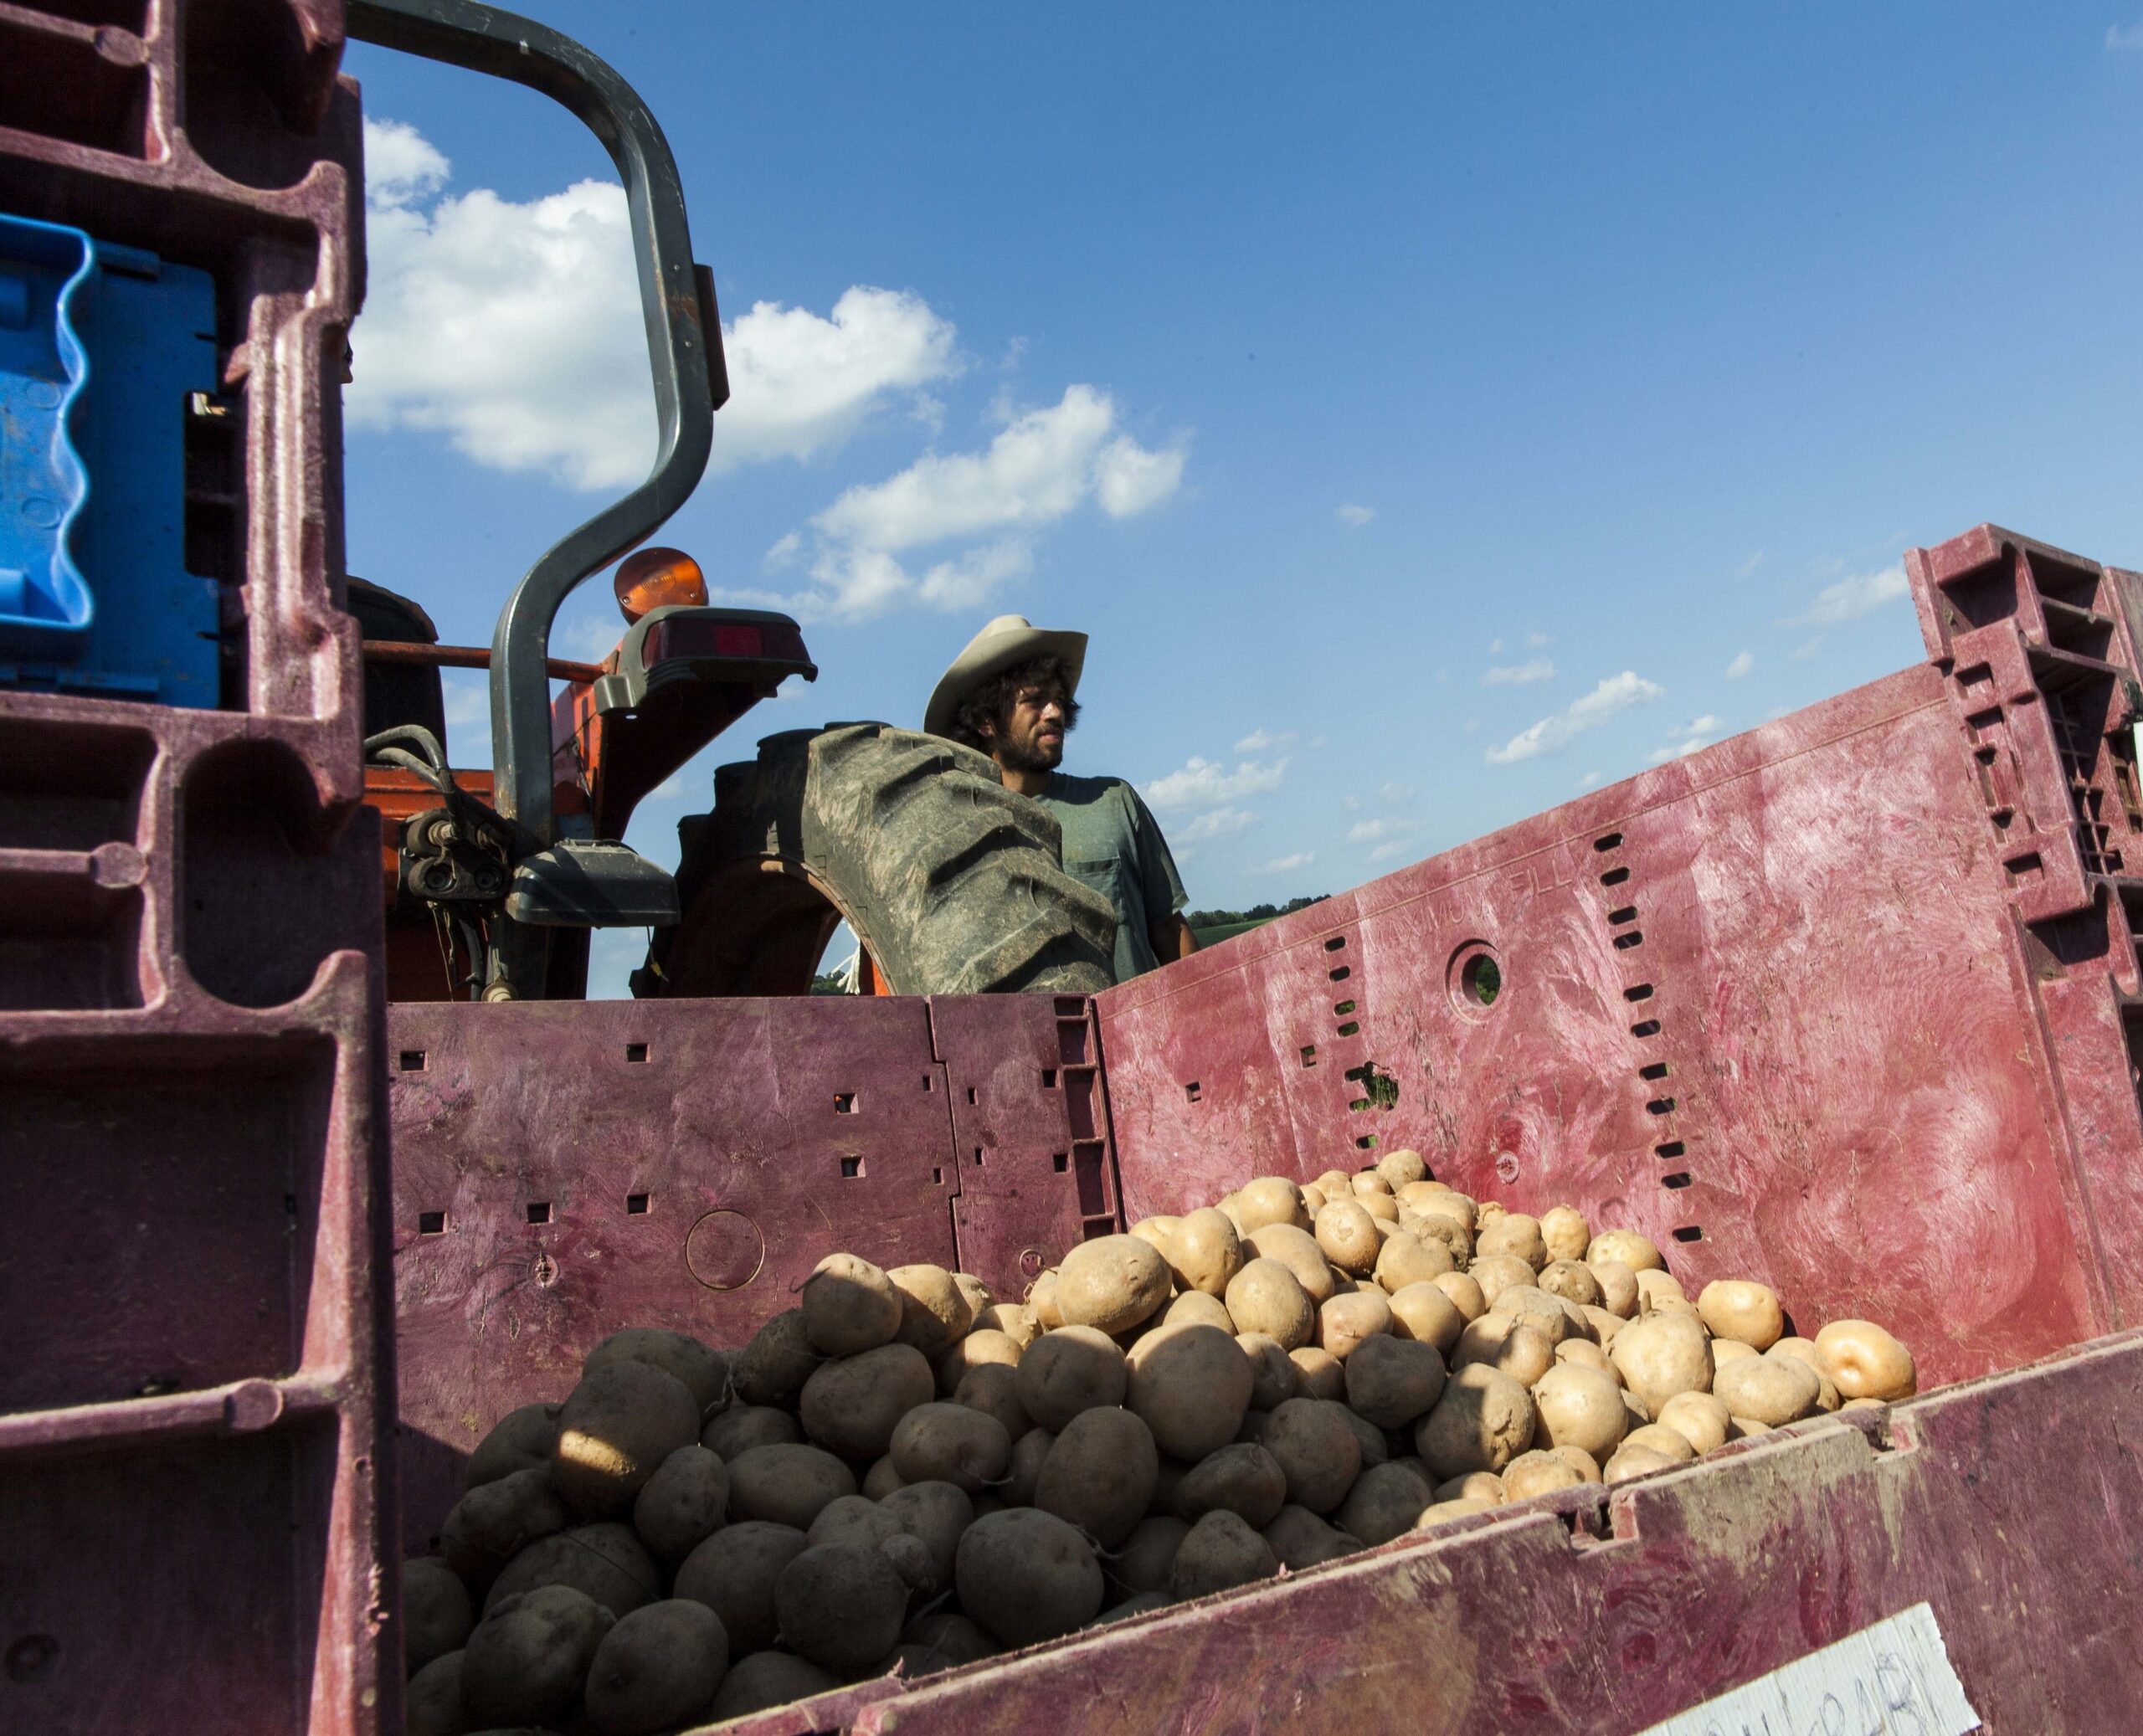 A farm hand stands by the harvested potato crop.